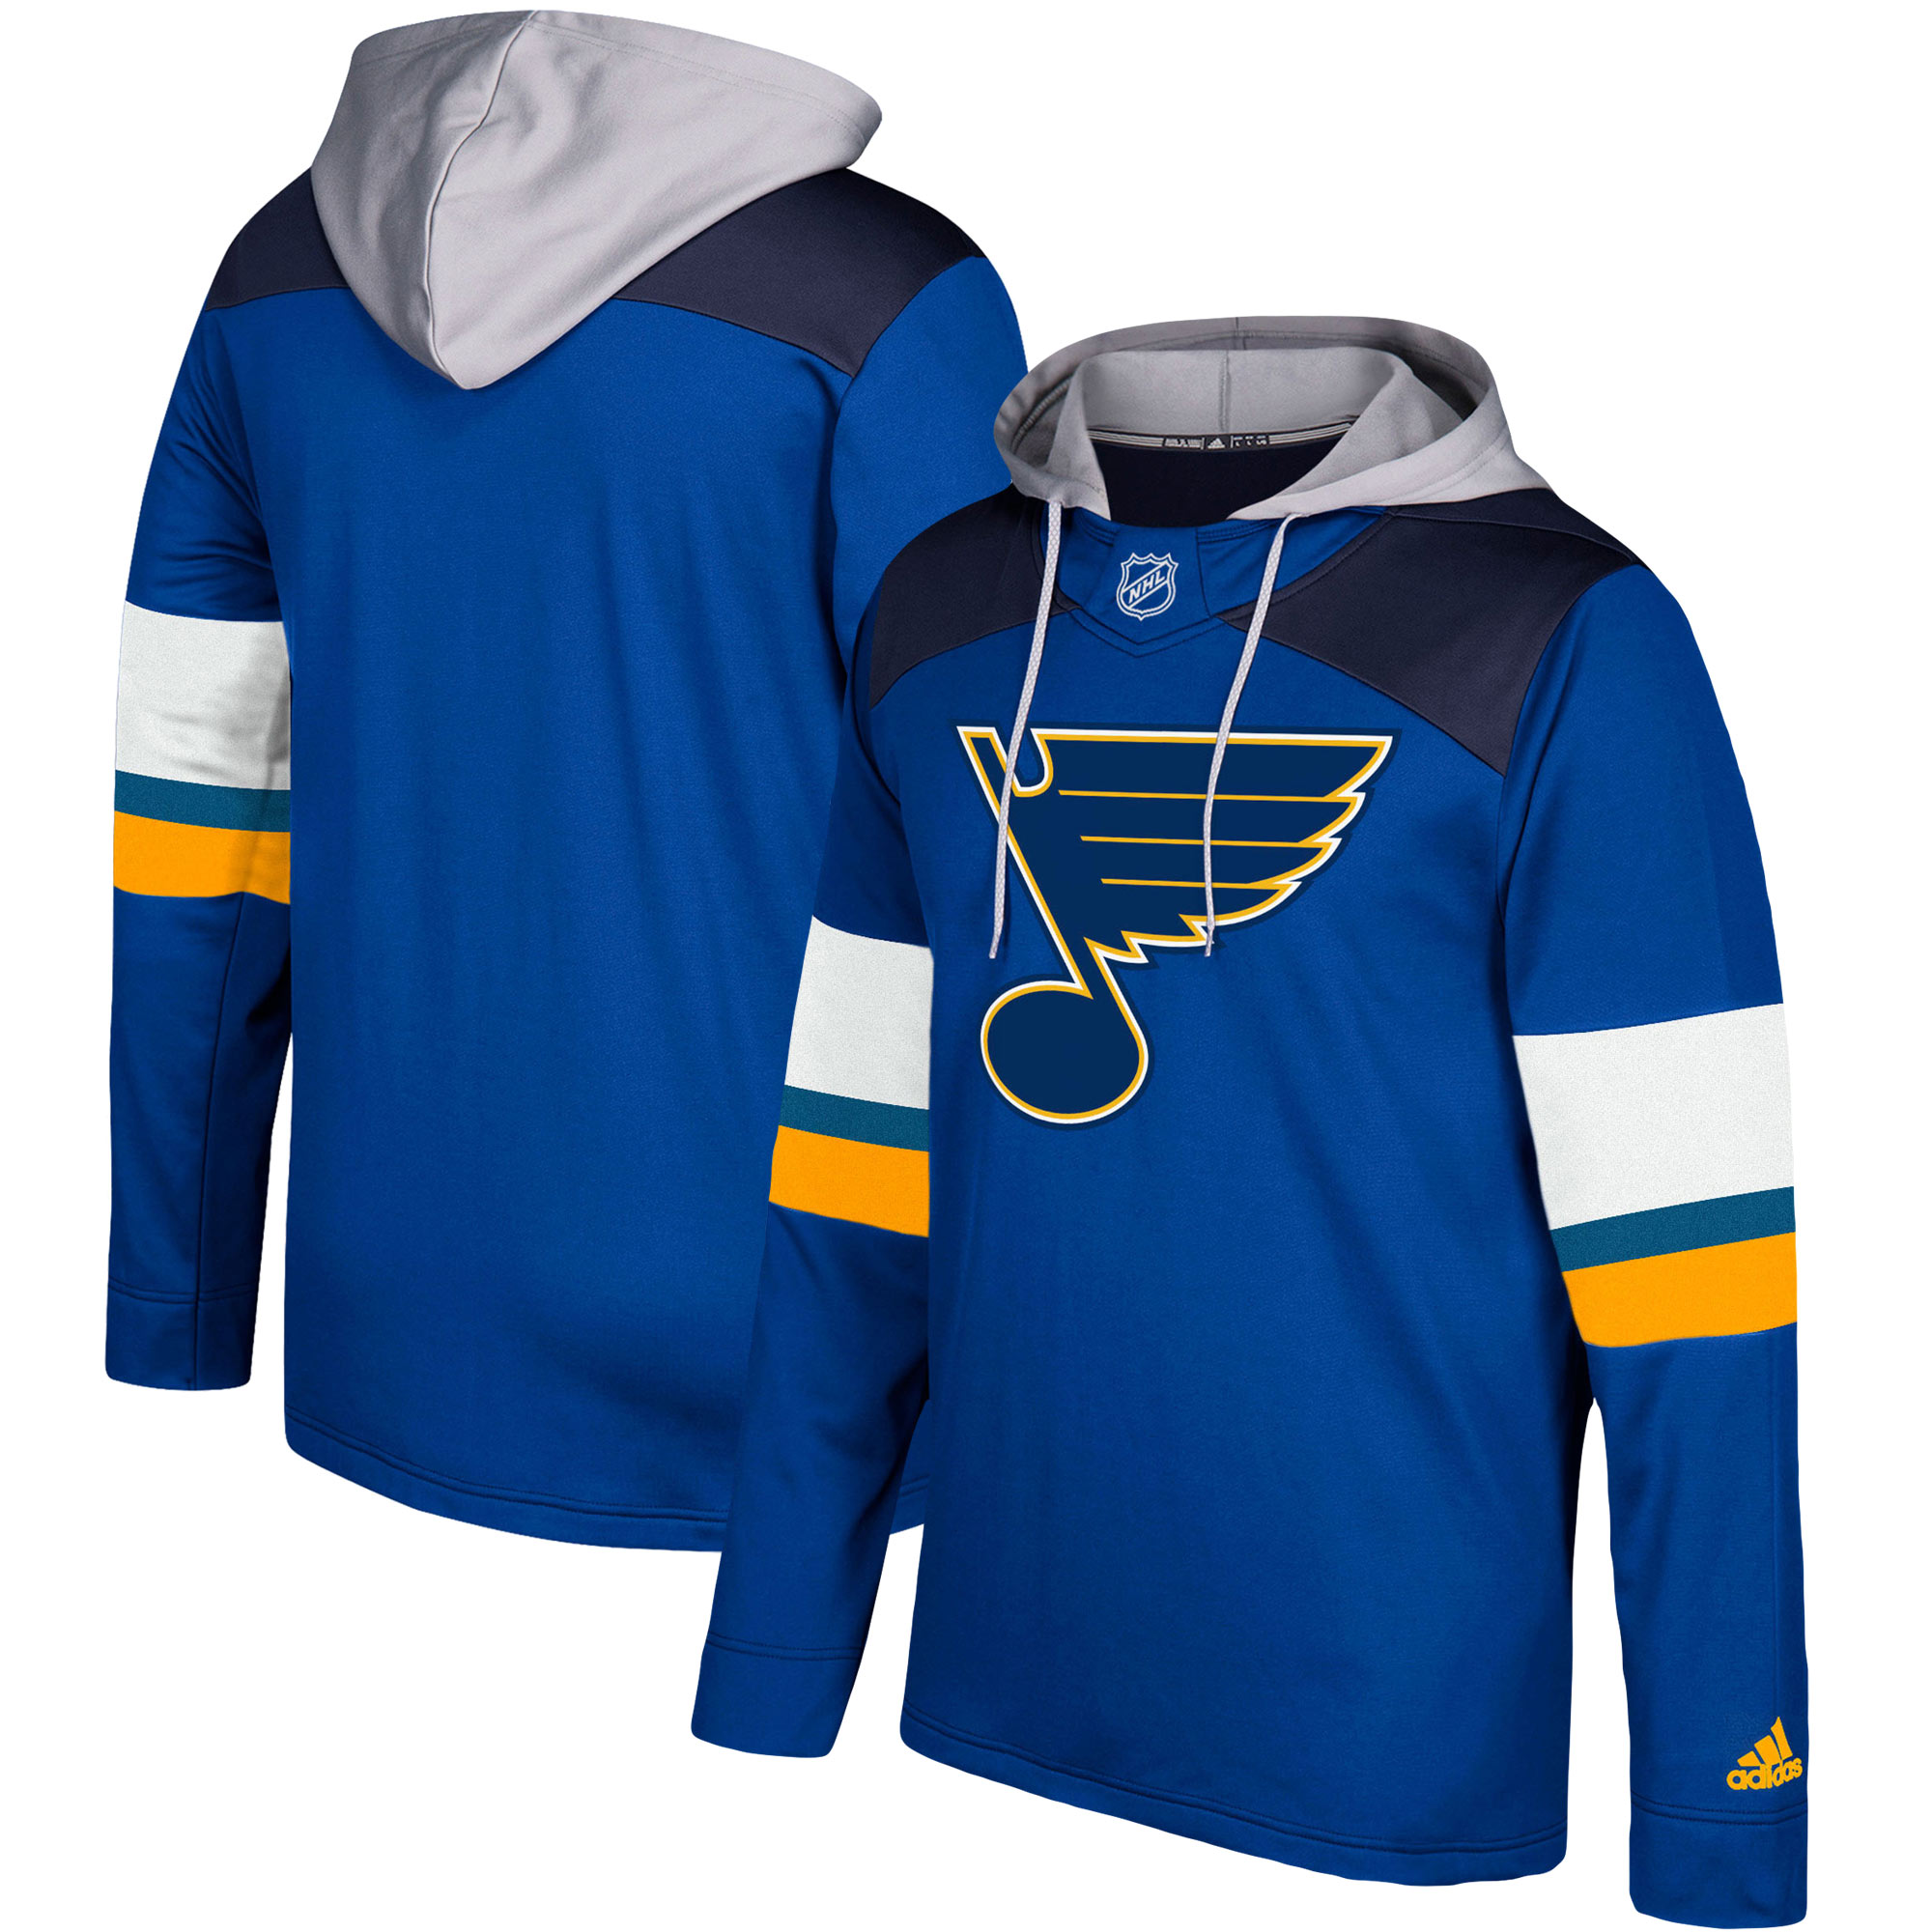 Men's St. Louis Blues Adidas Blue/Silver Jersey Pullover Hoodie